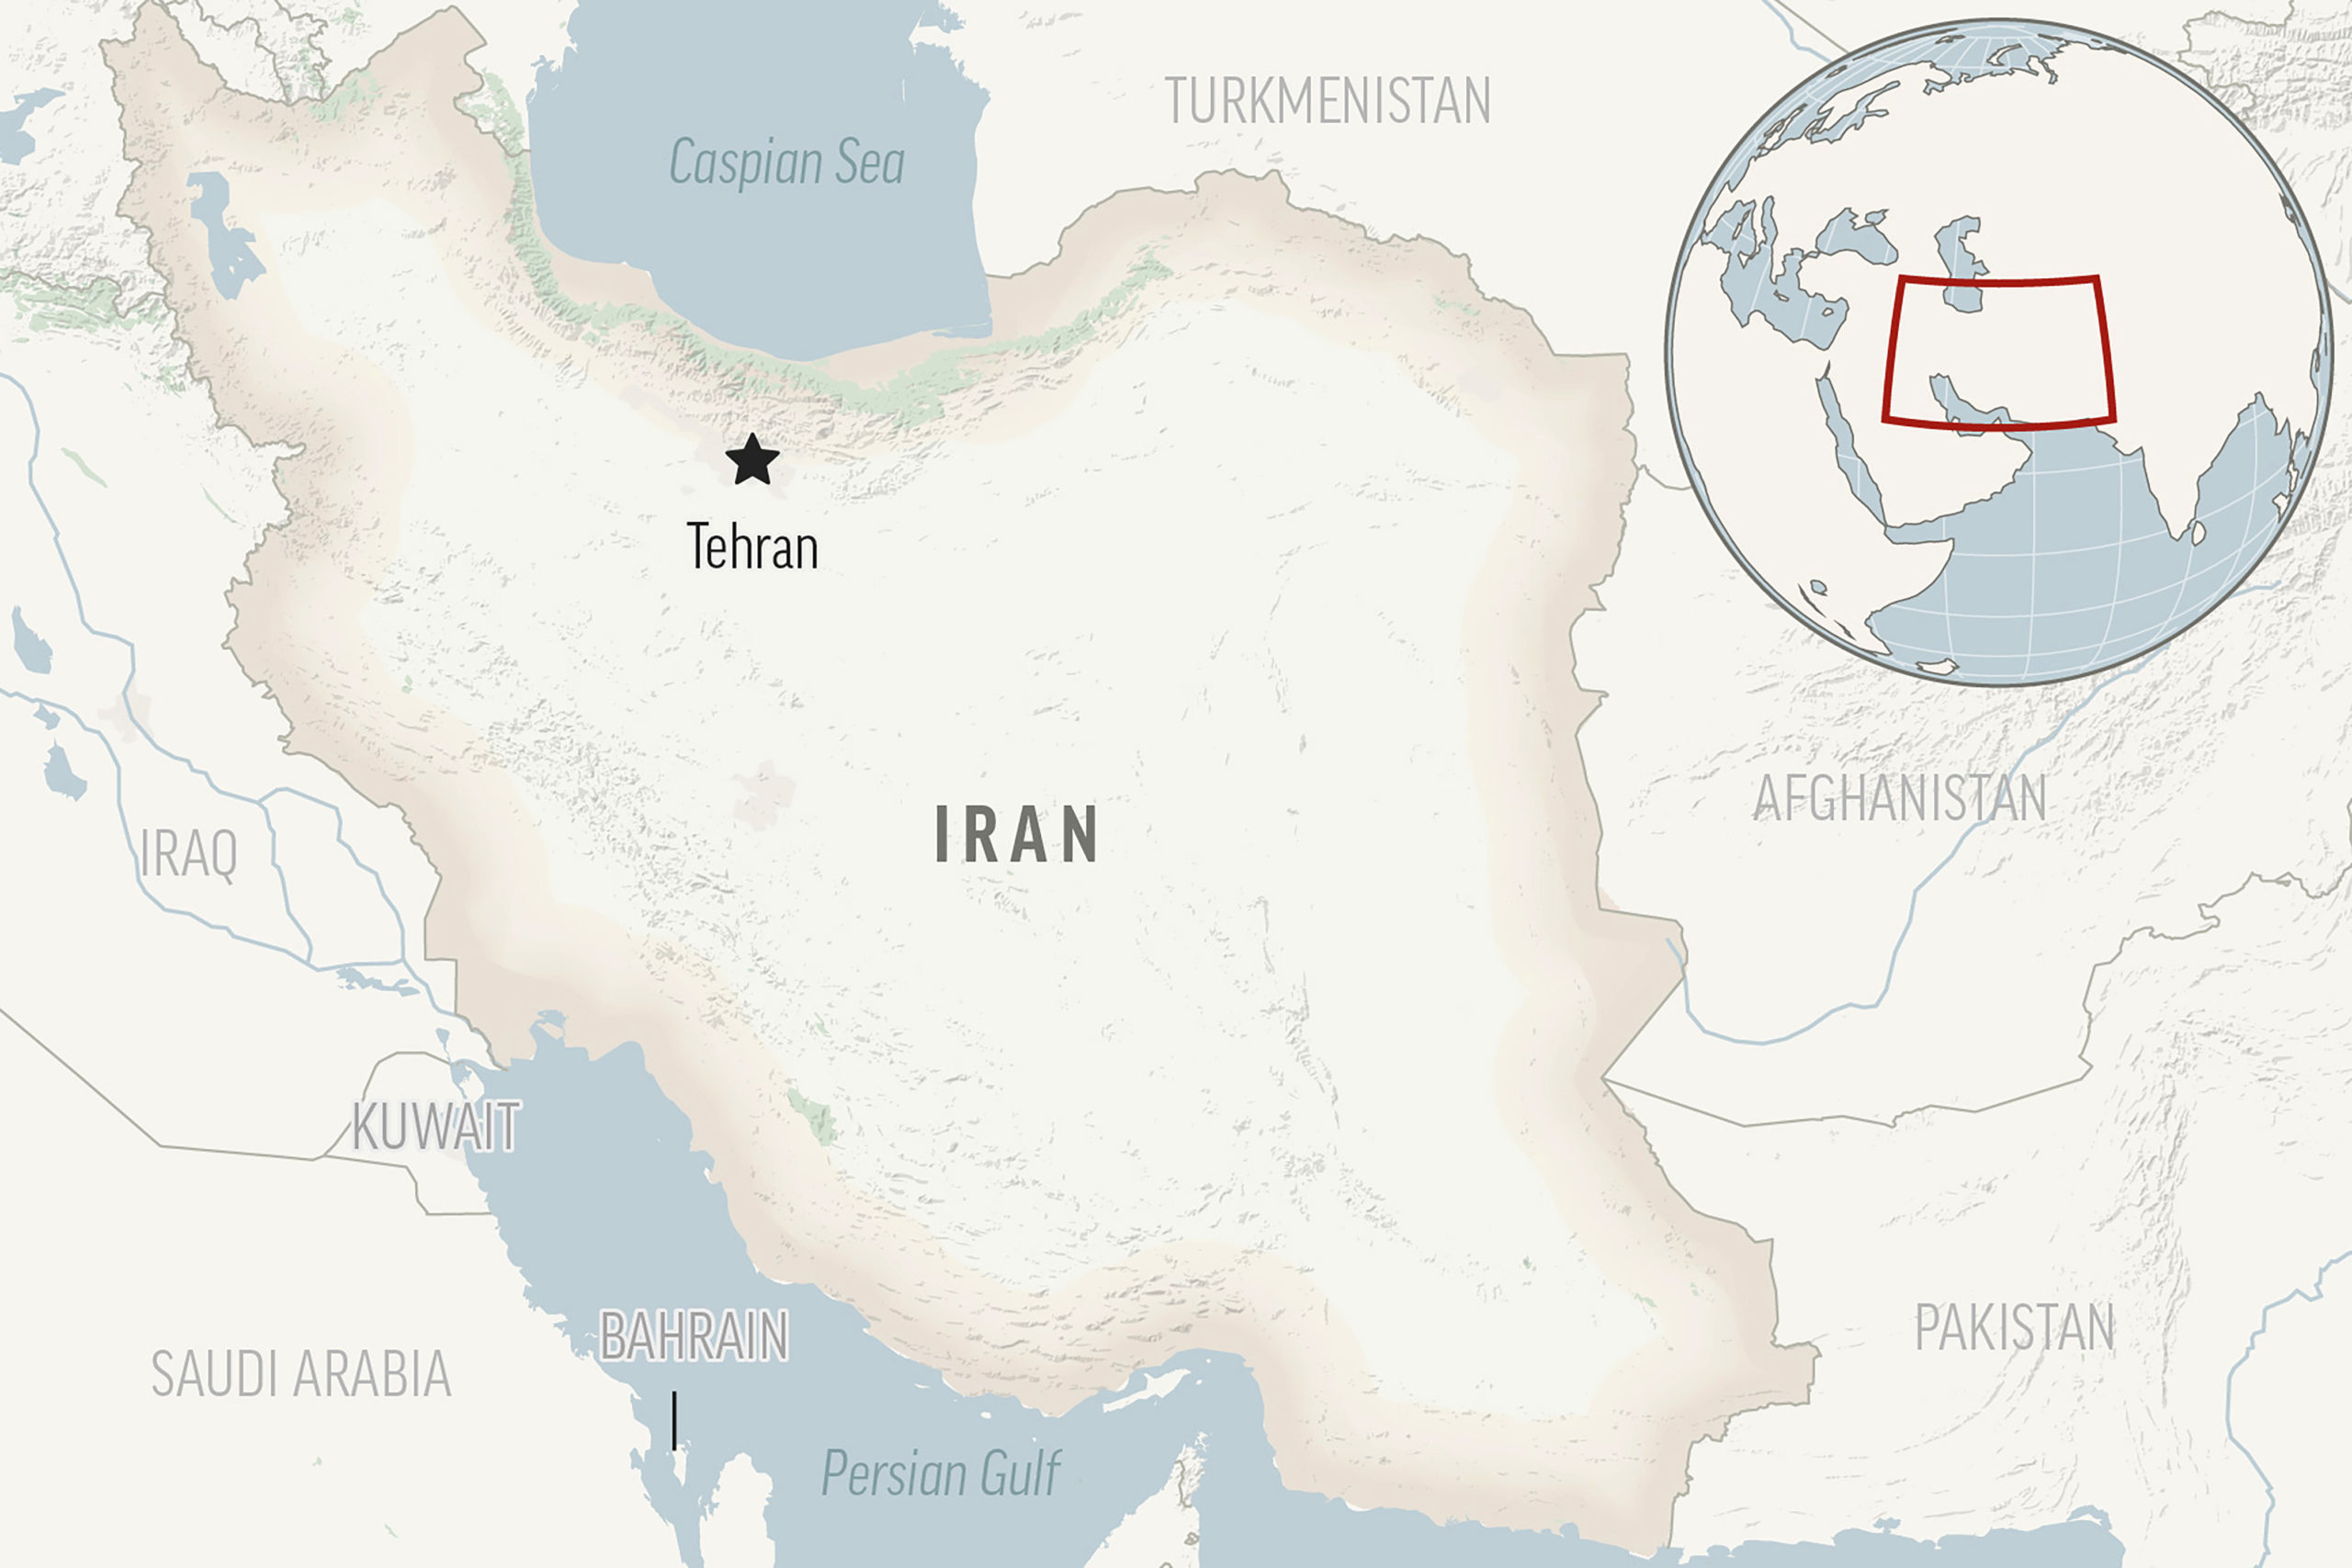 A map of Iran shows the capital city of Tehran.